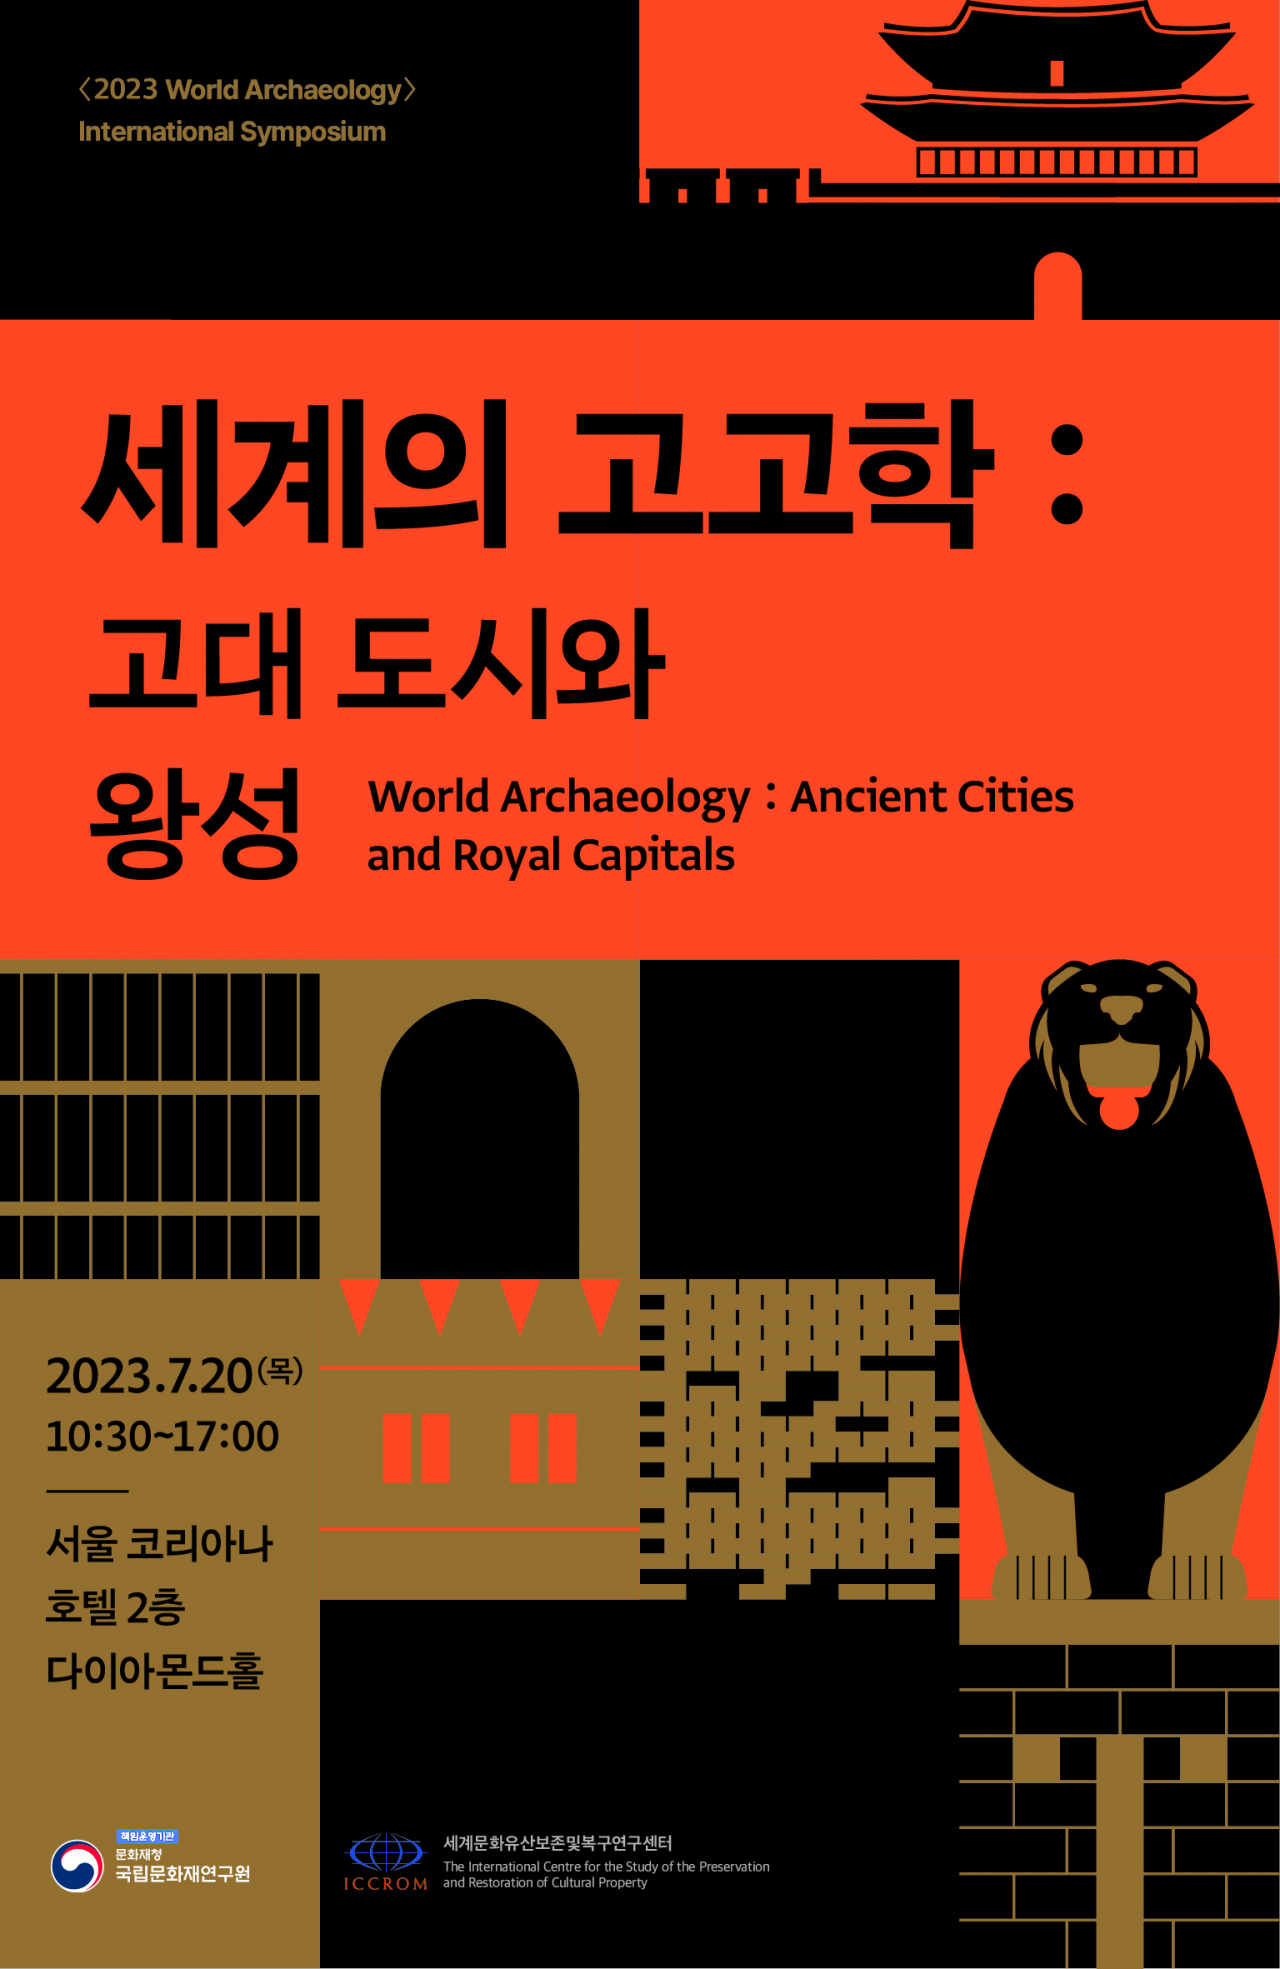 Poster for the 2023 World Archaeology International Symposium held in Seoul's Koreana Hotel, hosted by the CHA and ICRROM (CHA)